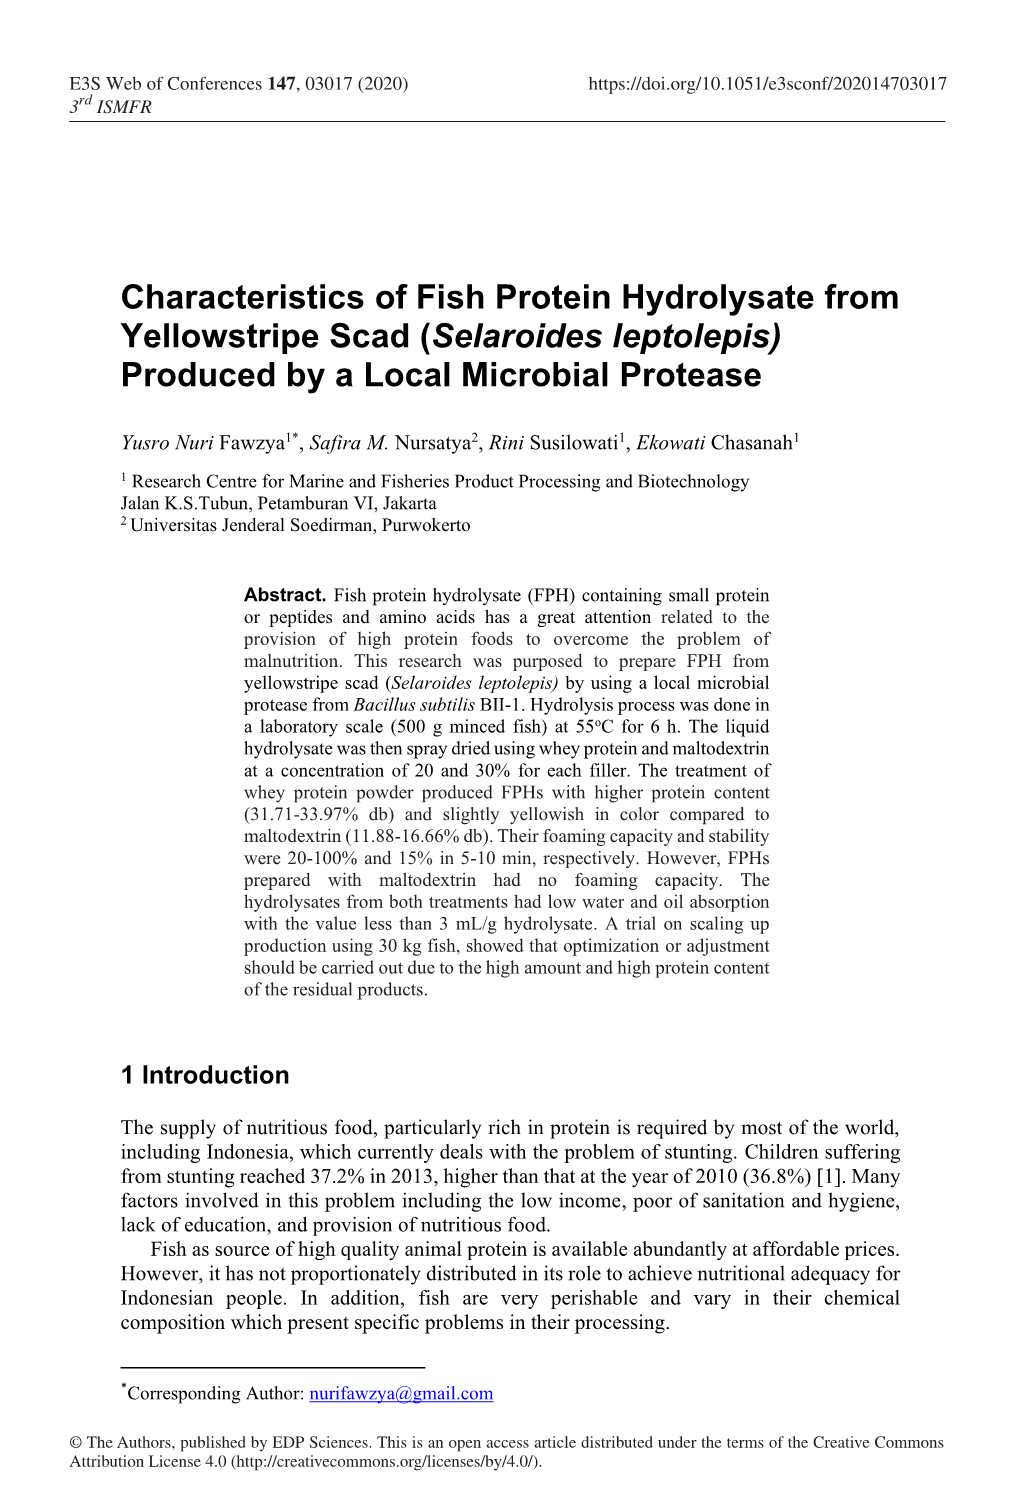 Characteristics of Fish Protein Hydrolysate from Yellowstripe Scad (Selaroides Leptolepis) Produced by a Local Microbial Protease